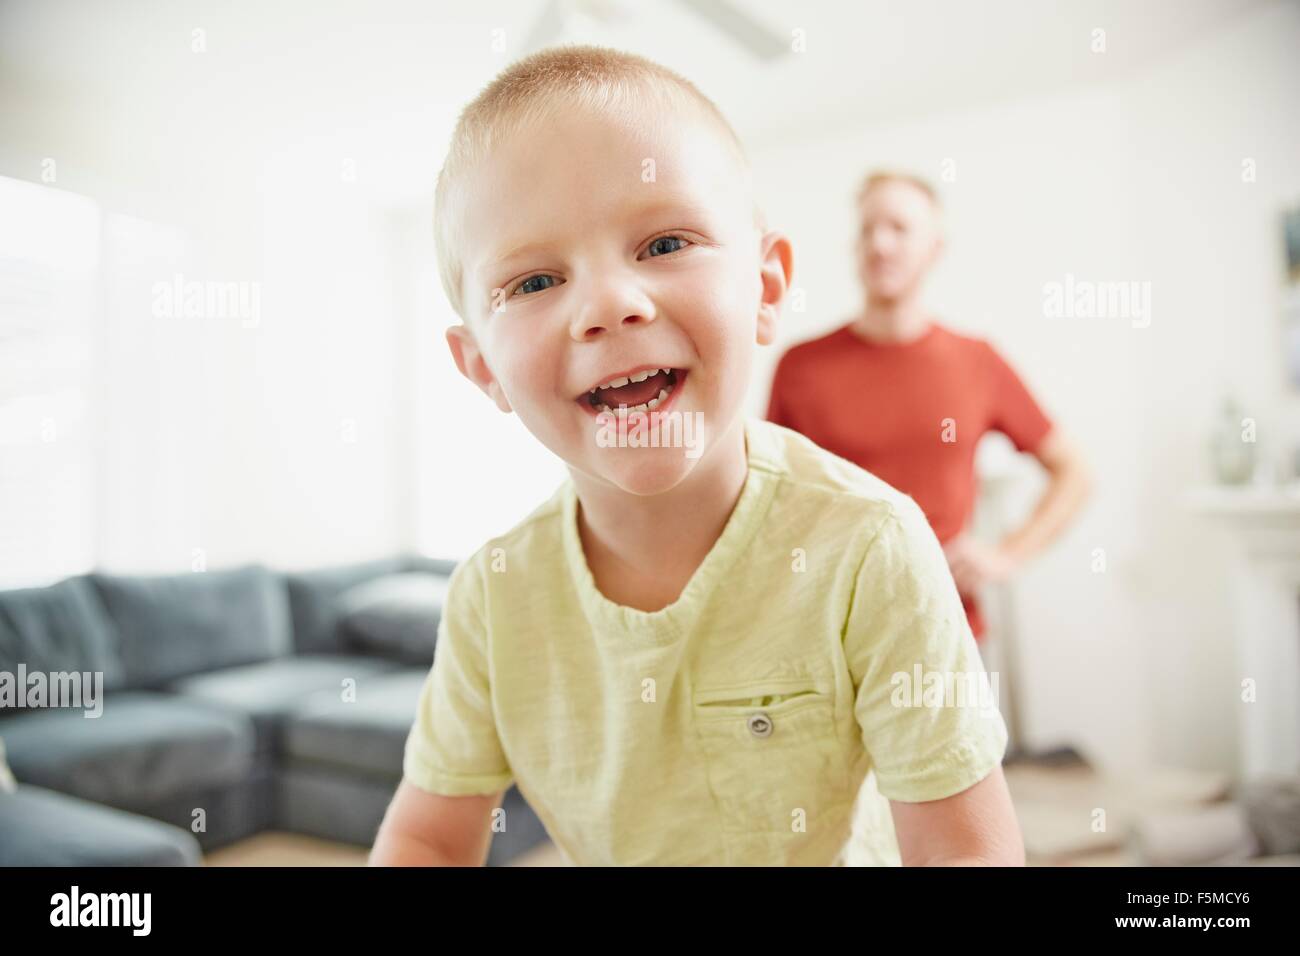 Boy smiling in living room, father in background Stock Photo